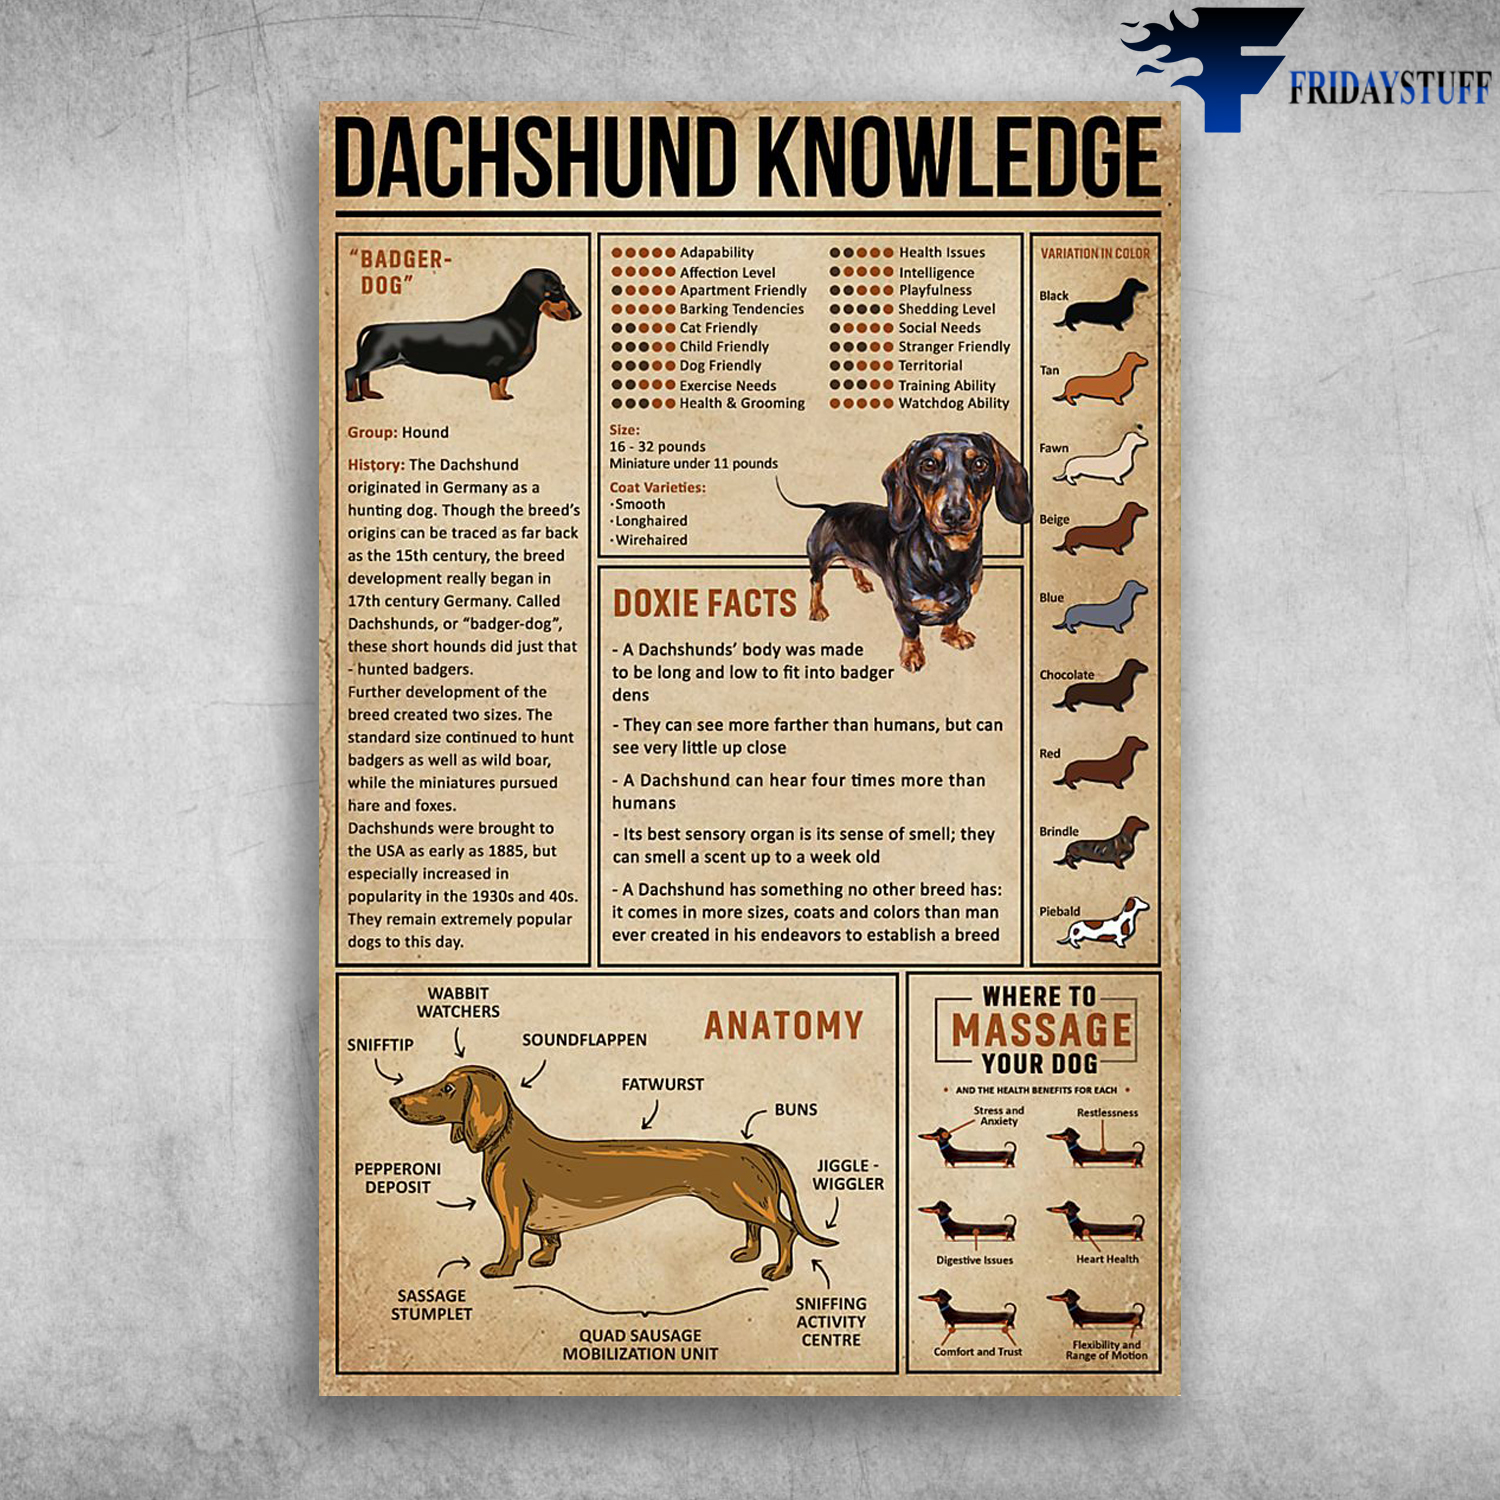 Dachshund Dog Knowledge Badger Dog Doxie Facts